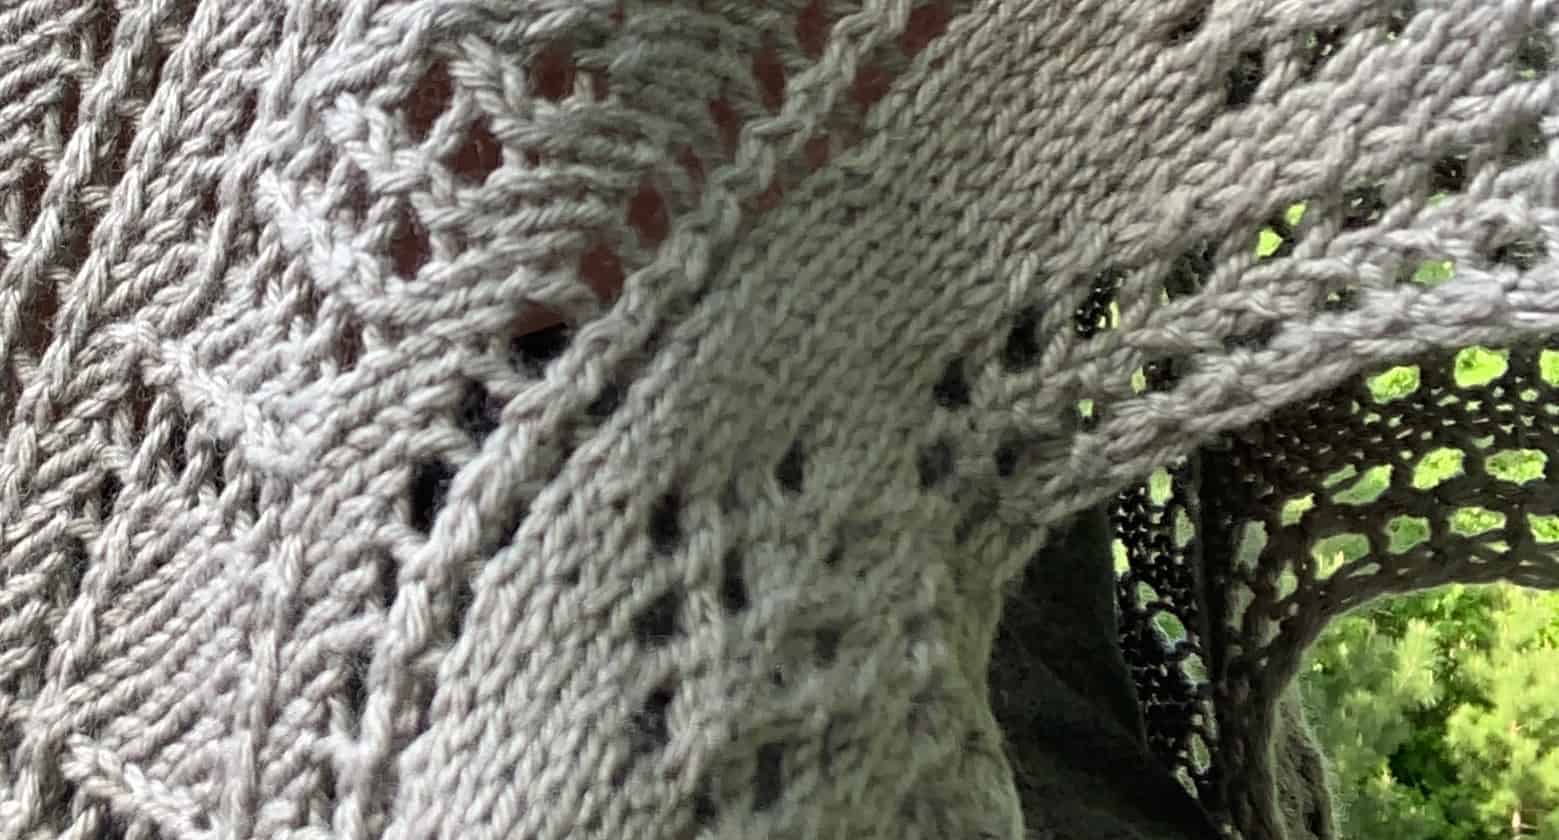 Shetland Knitting: Delicate Lace in a Rugged Landscape